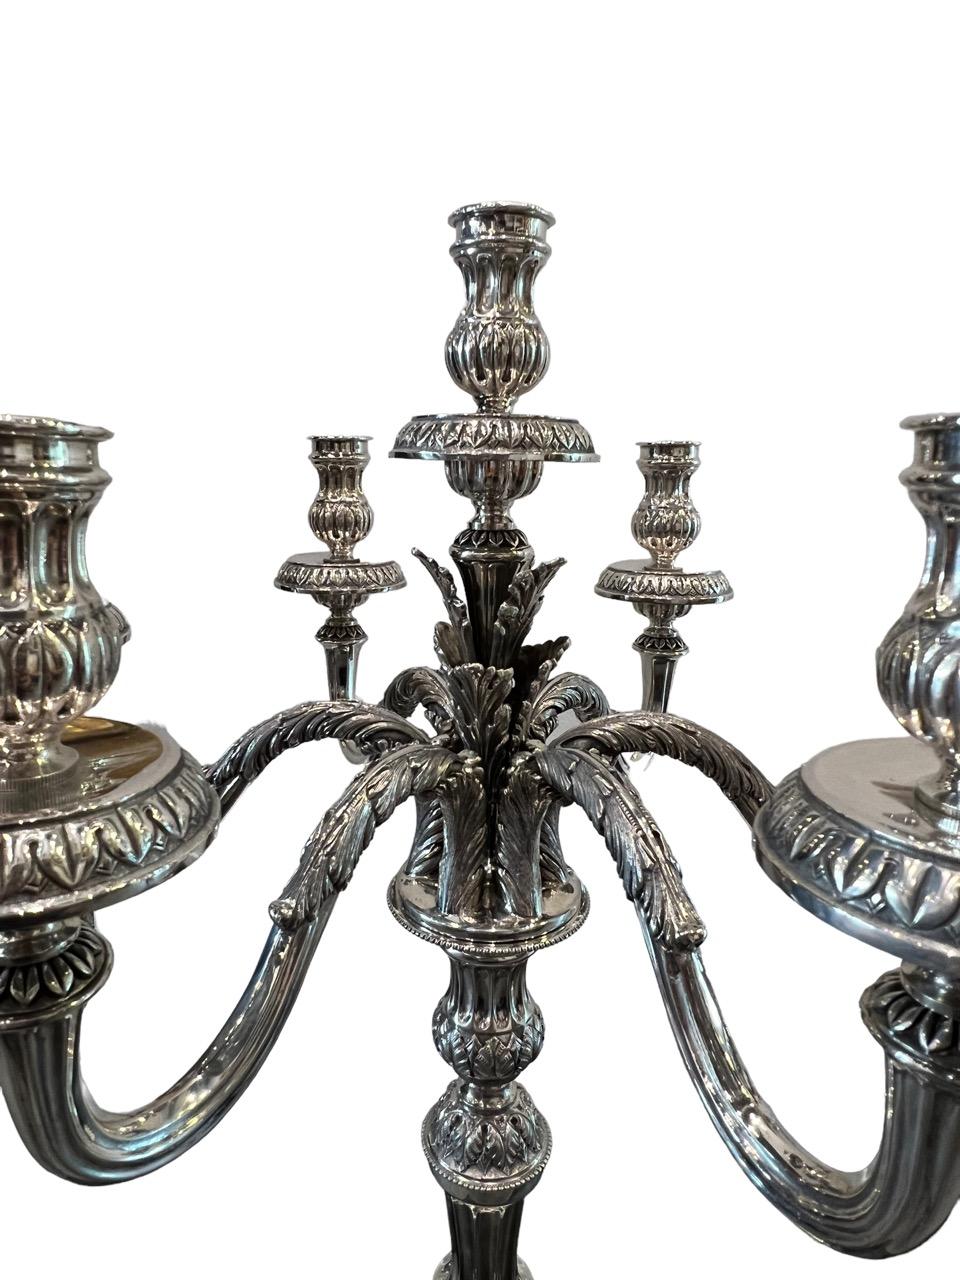 1910 Italian Pair of Sterling Silver Candelabras, Tall and Heavy For Sale 13